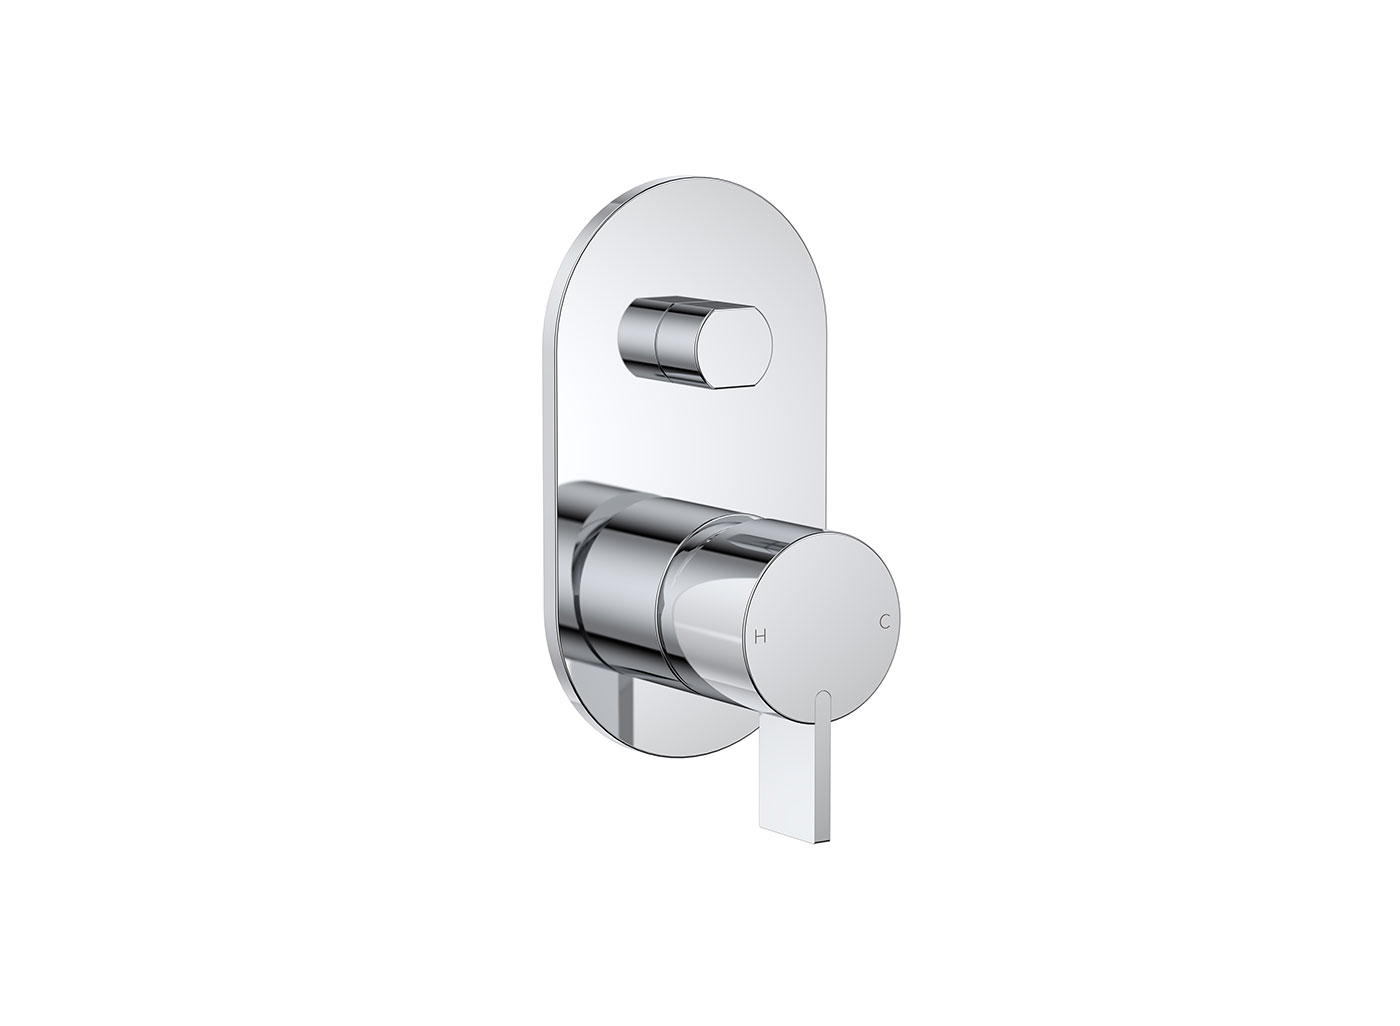 The Round Blade Wall Mixer with Diverter allows you to effortlessly choose between diverting water to your shower or your bath outlet.